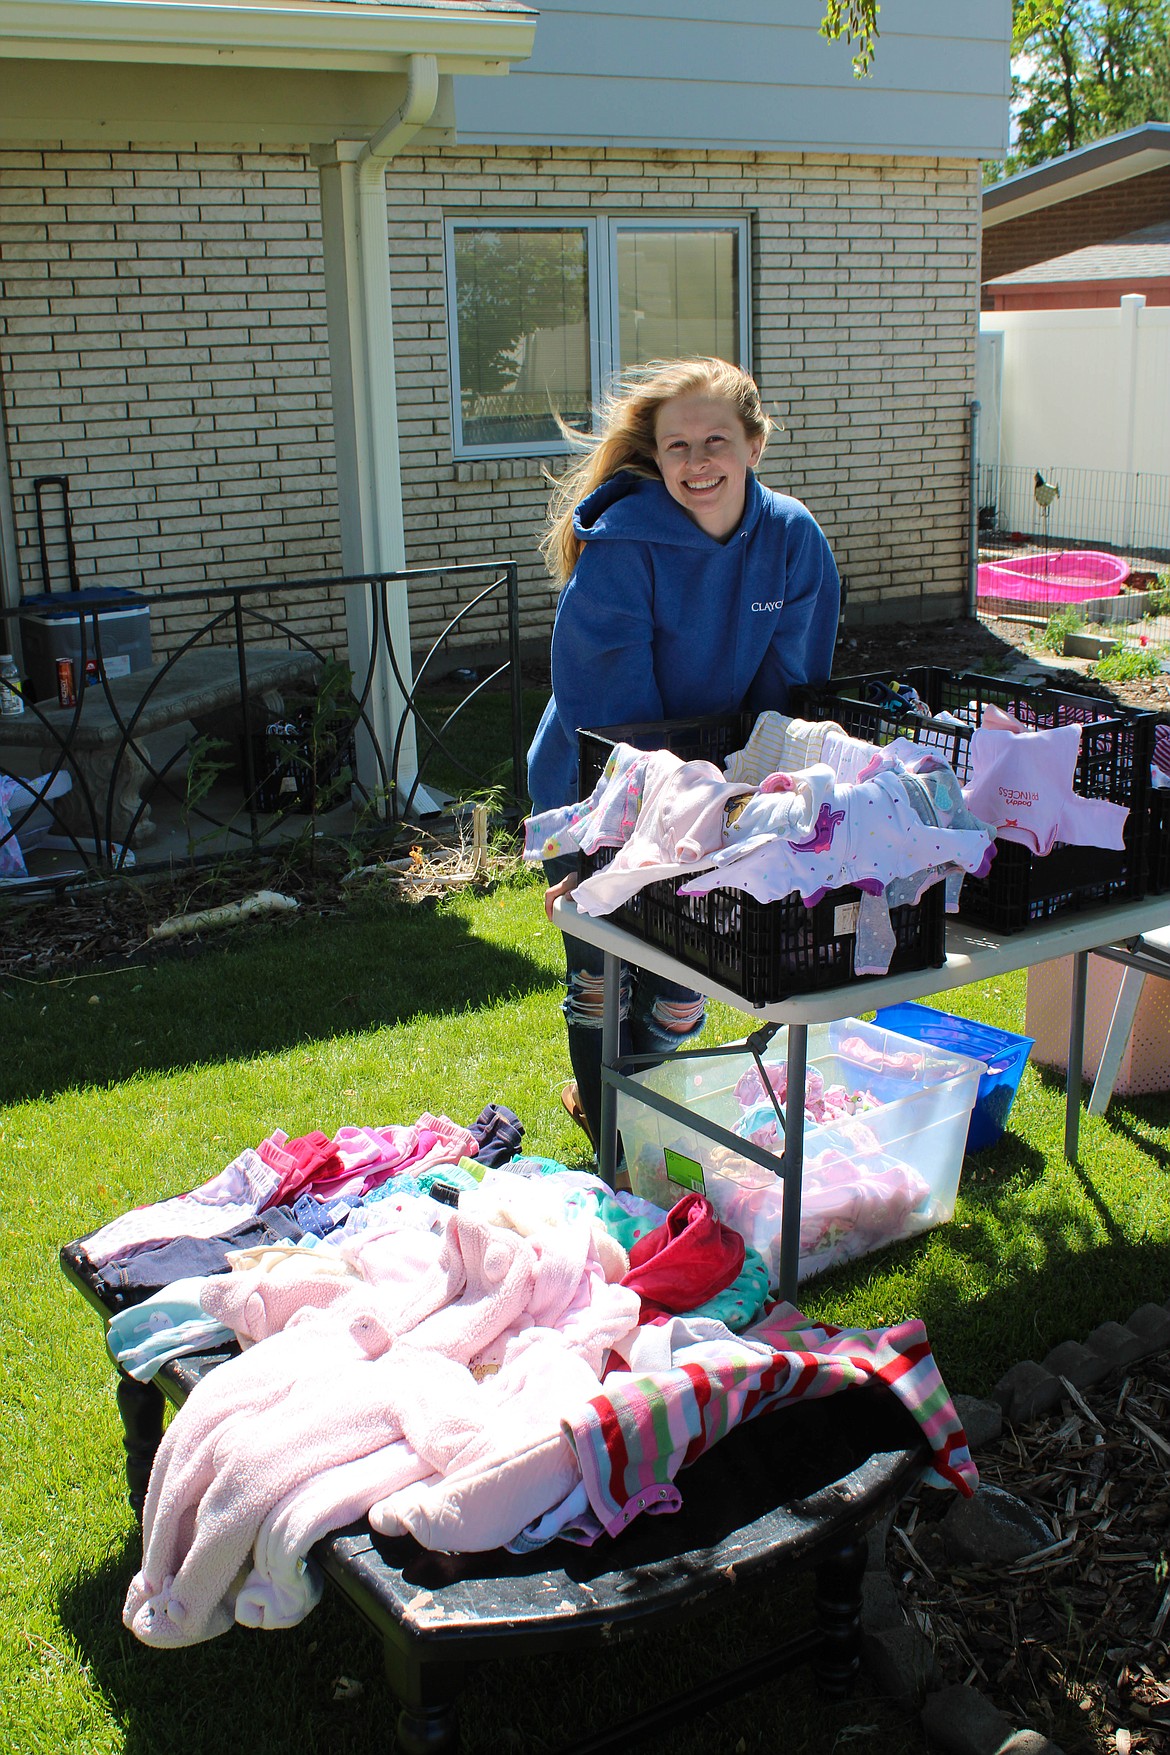 Cassidy Williams stands before her baby clothes at Saturday’s yard sale extravaganza in Moses Lake.